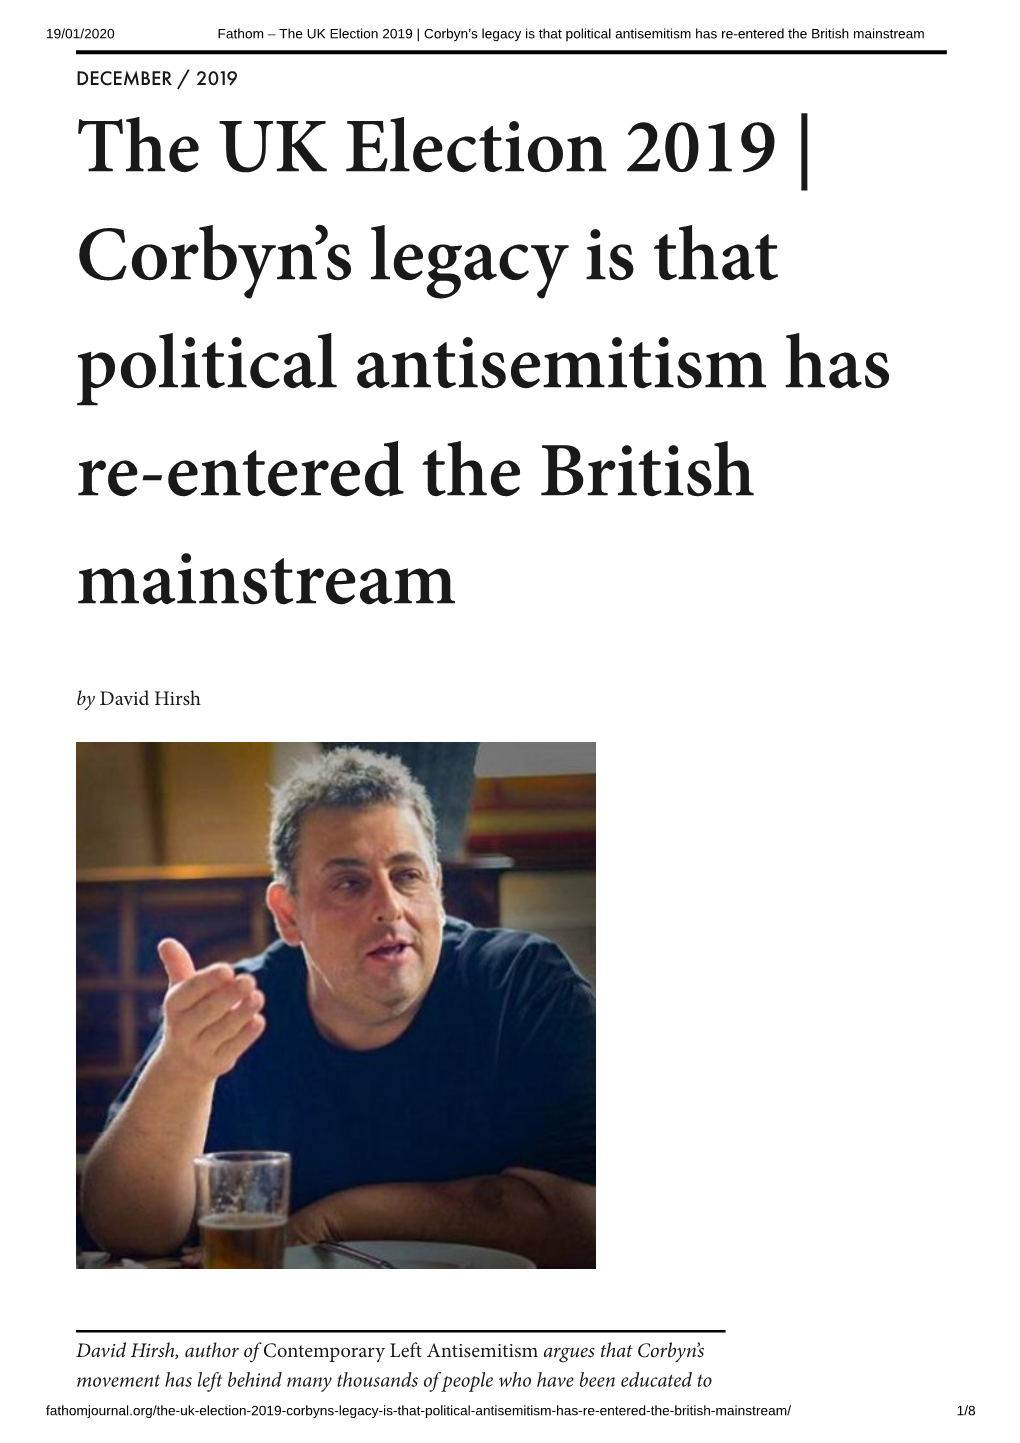 The UK Election 2019 | Corbyn's Legacy Is That Political Antisemitism Has Re-Entered the British Mainstream